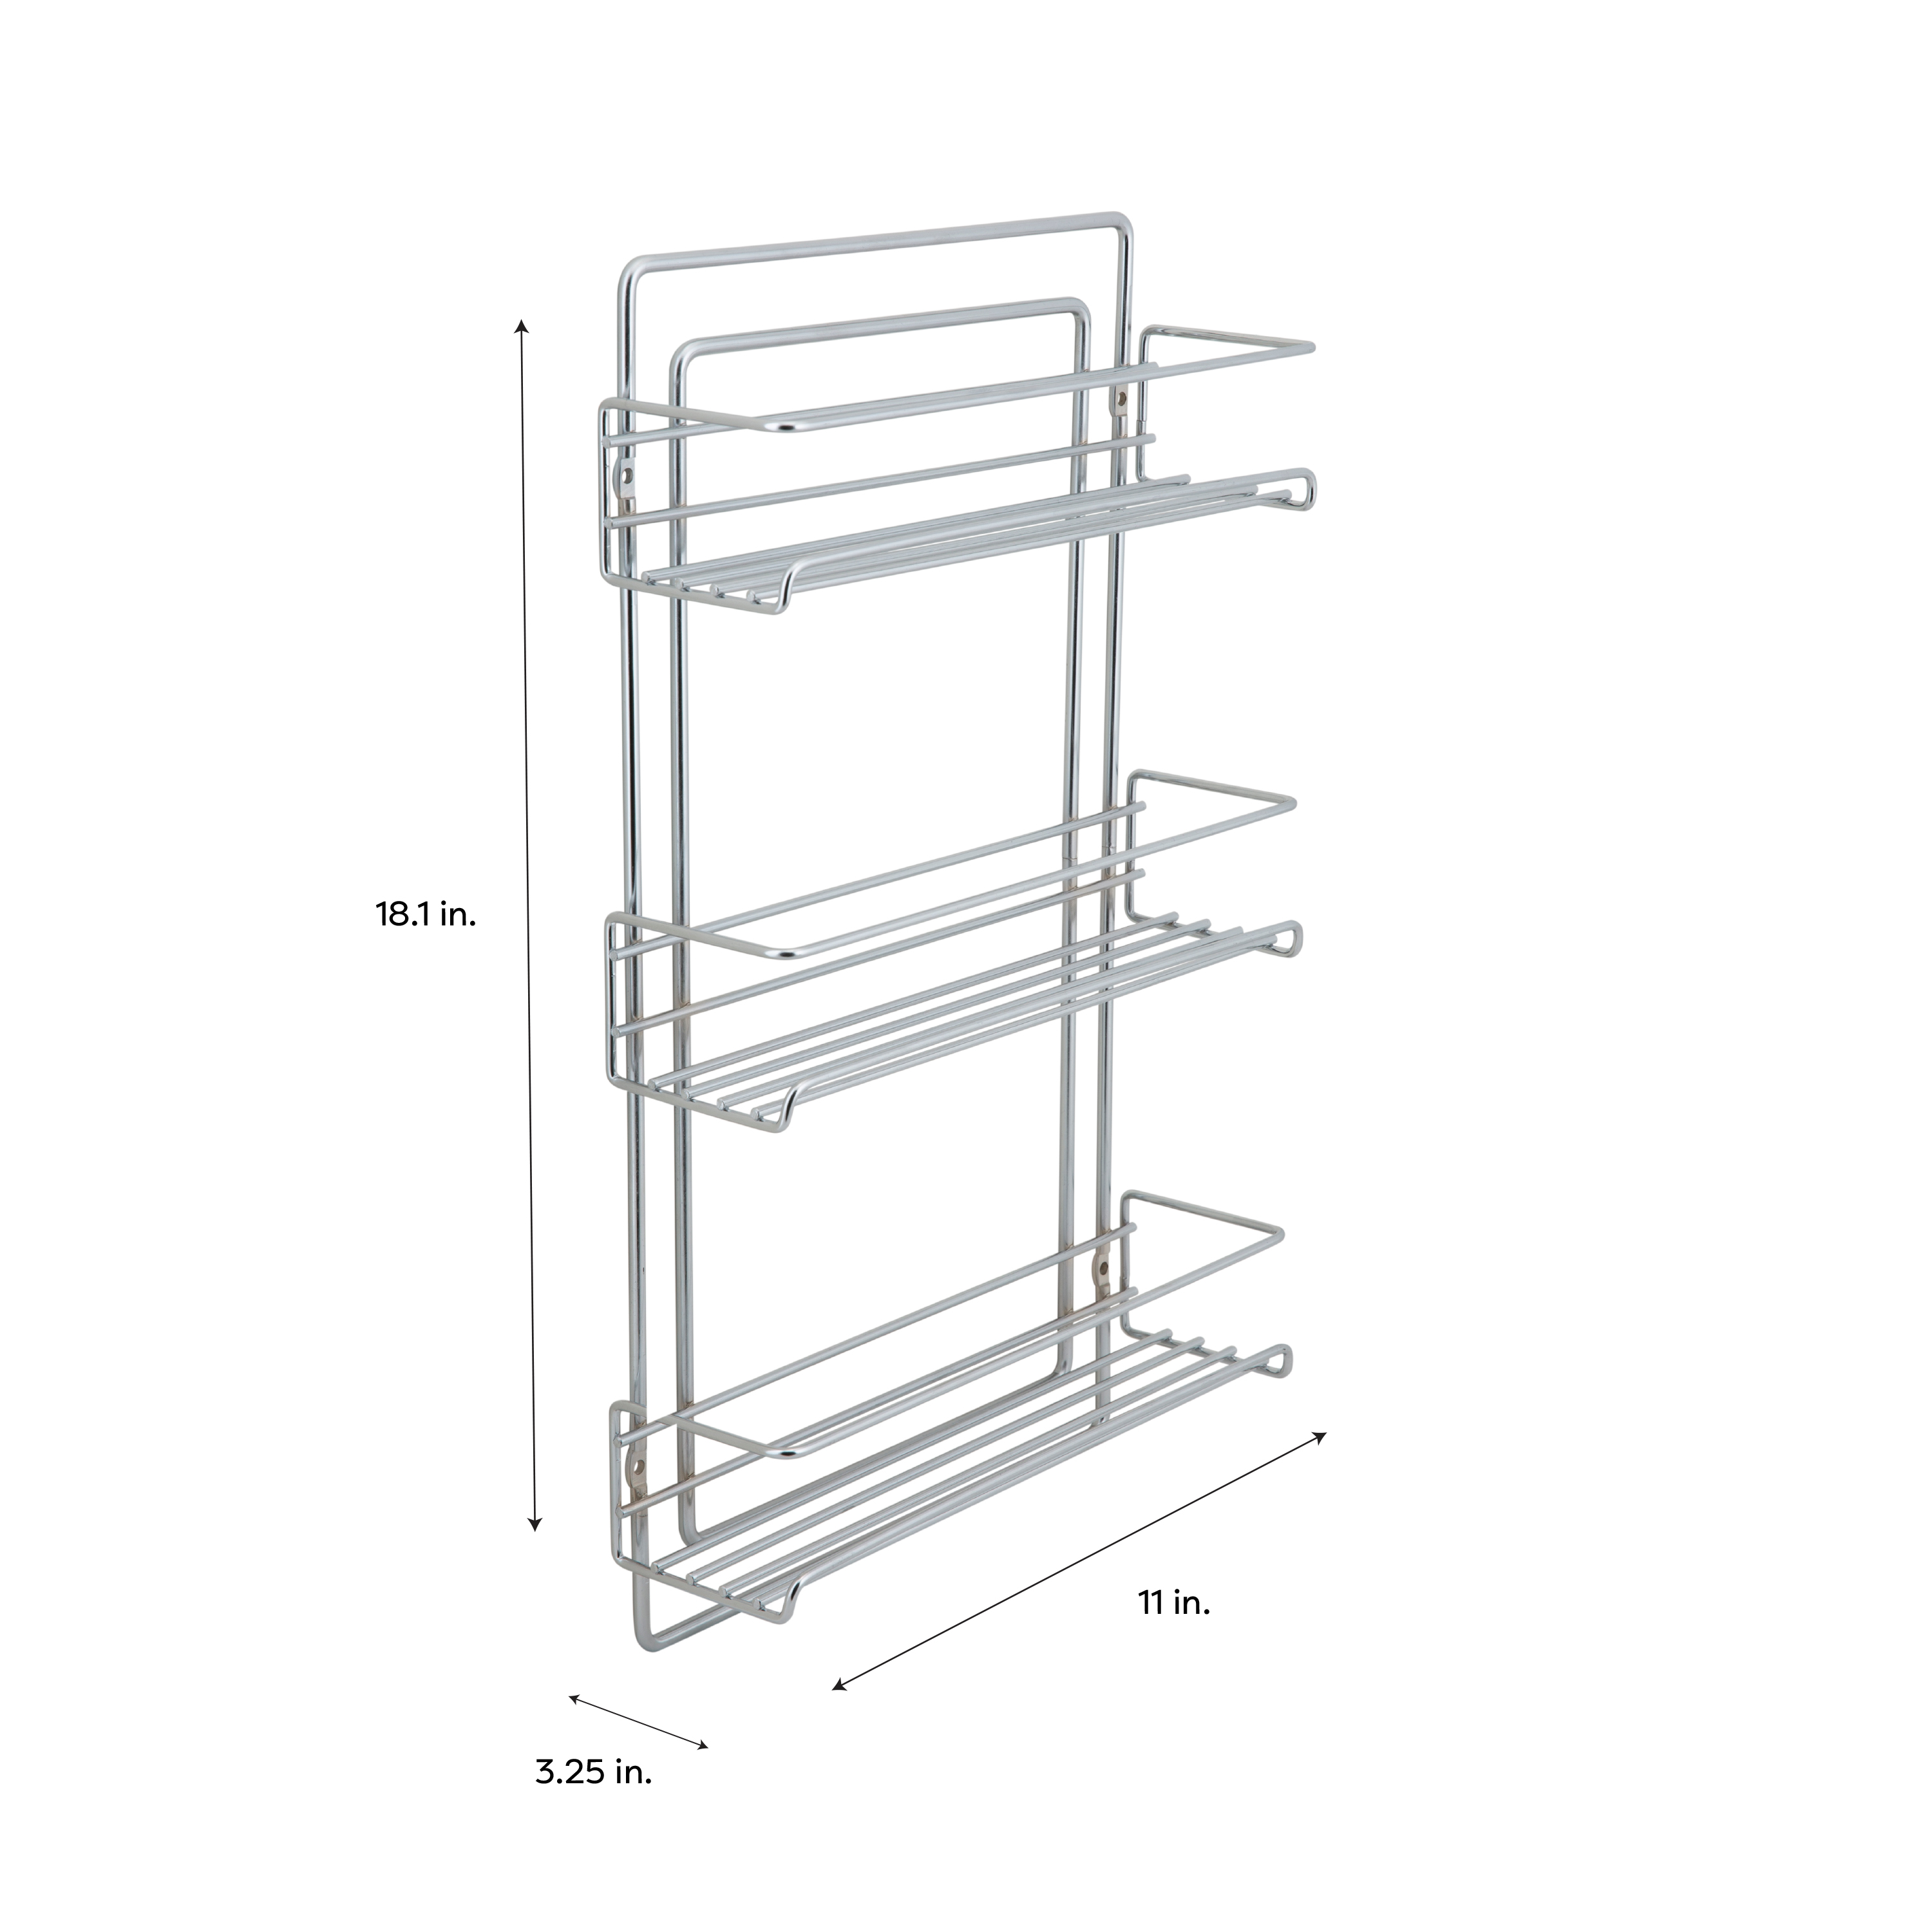 Organize It All 3 Tier Wall Mountable Spice Rack in Chrome - image 4 of 6